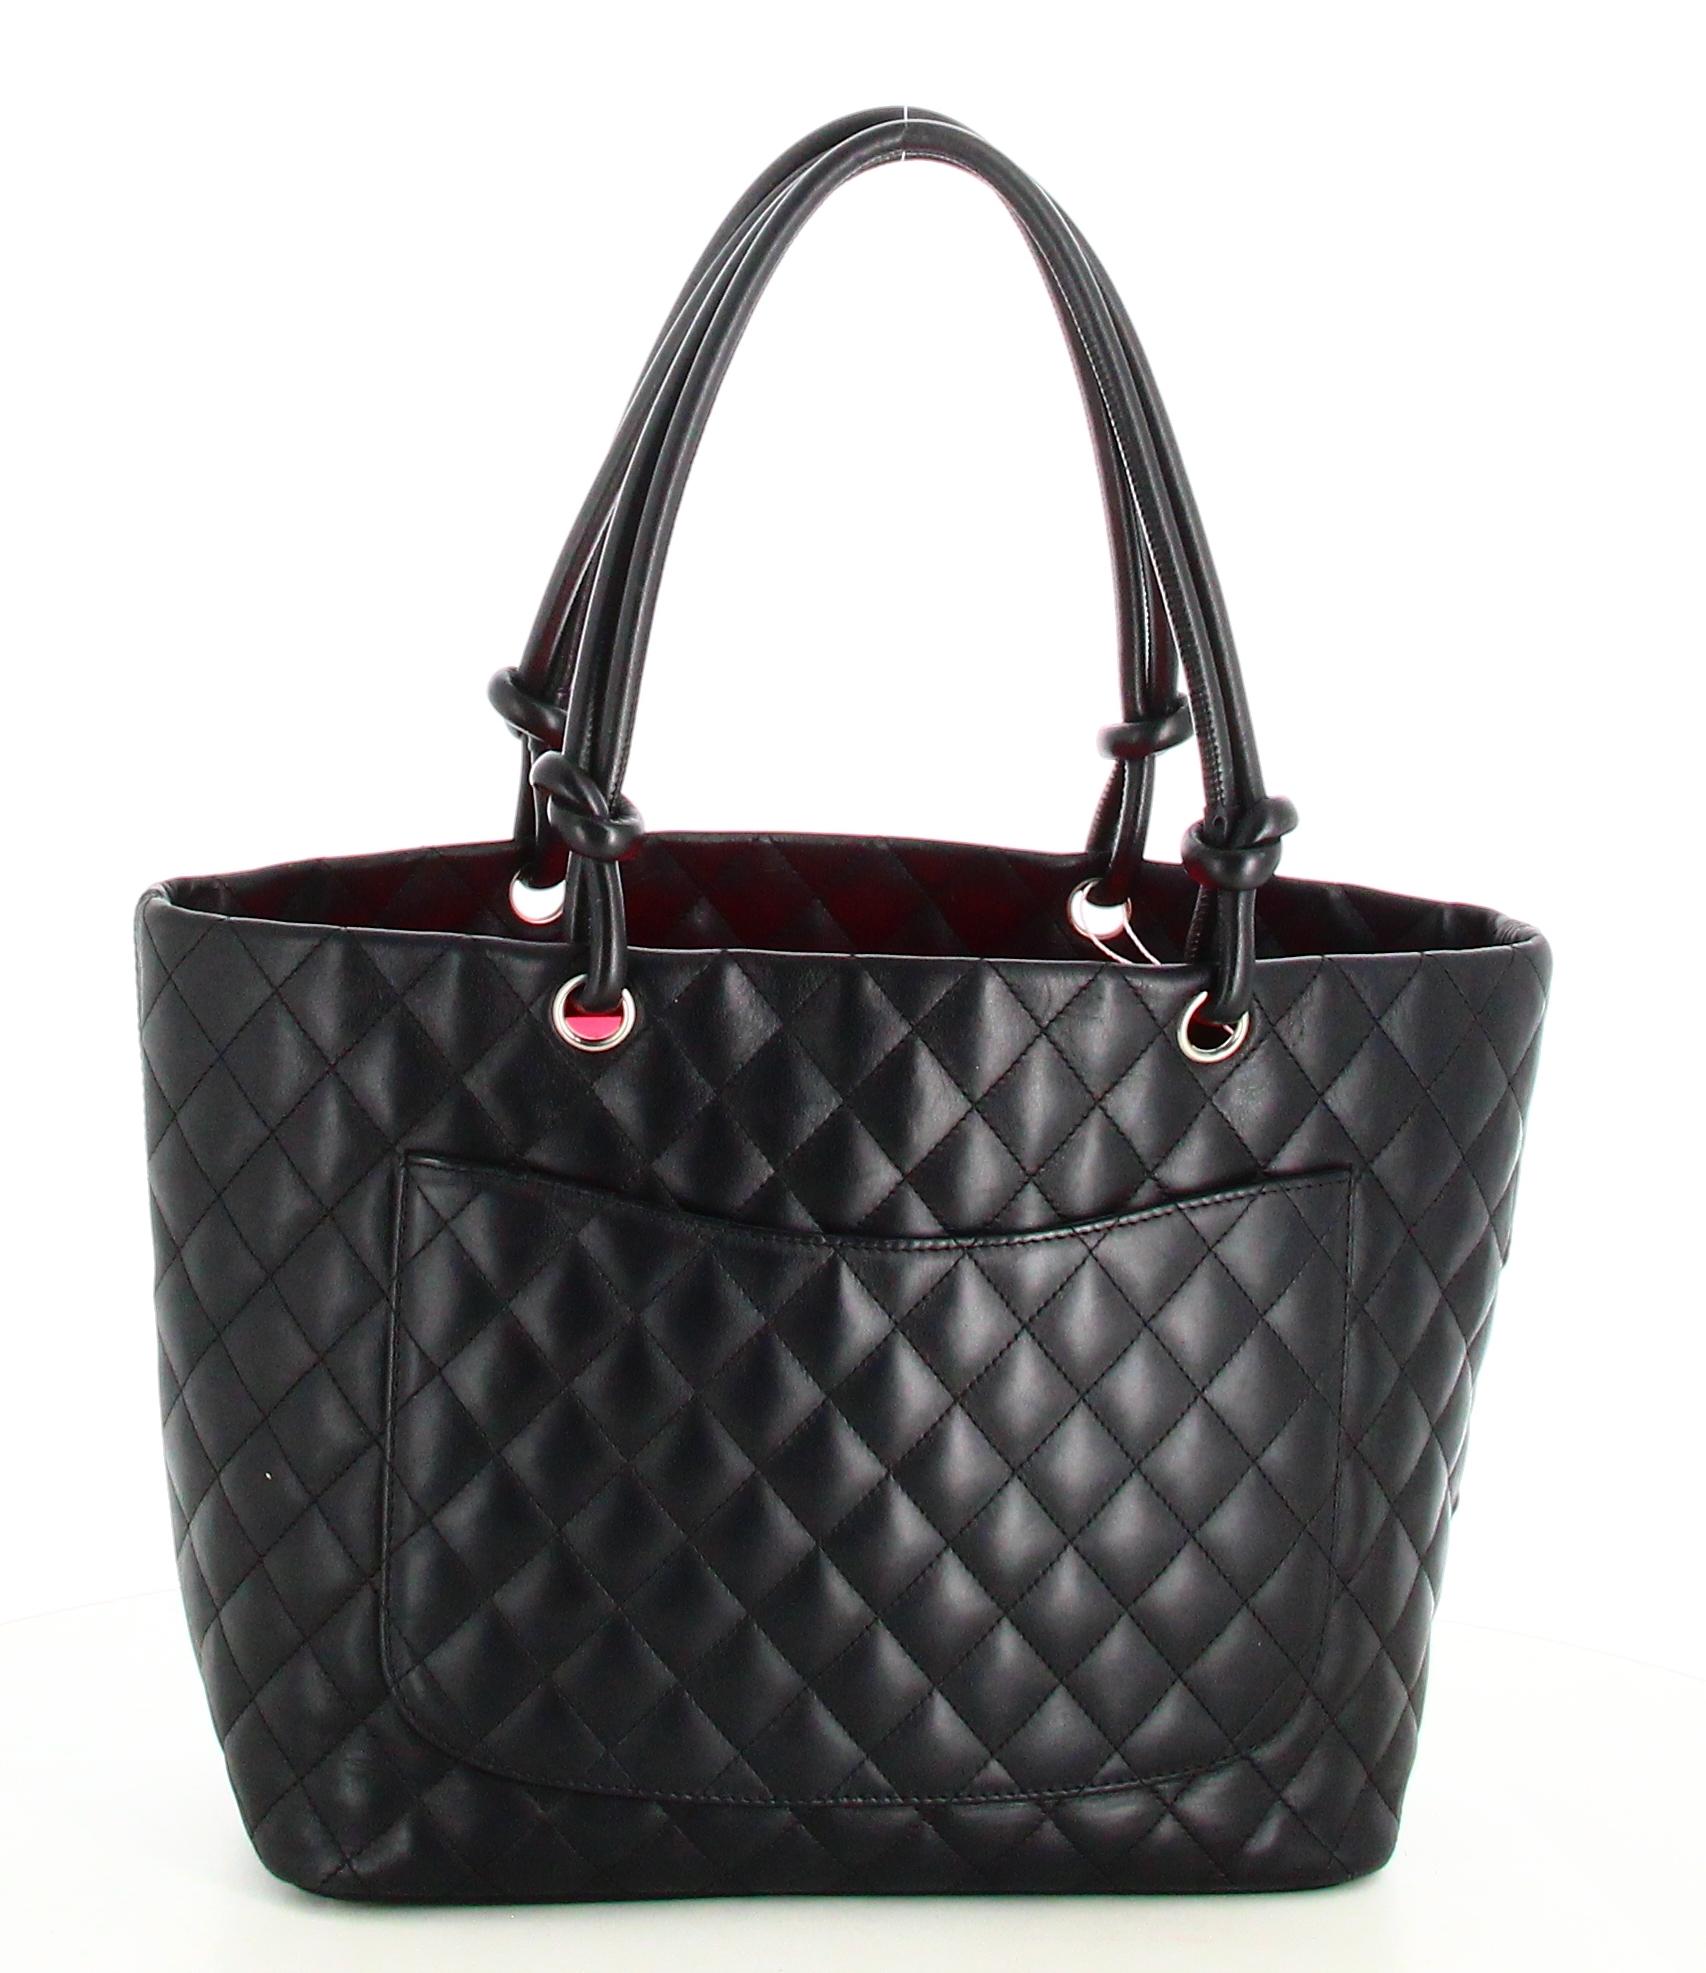 Chanel Handbag Black Leather Large Quilted Cambon Tote Line For Sale 2